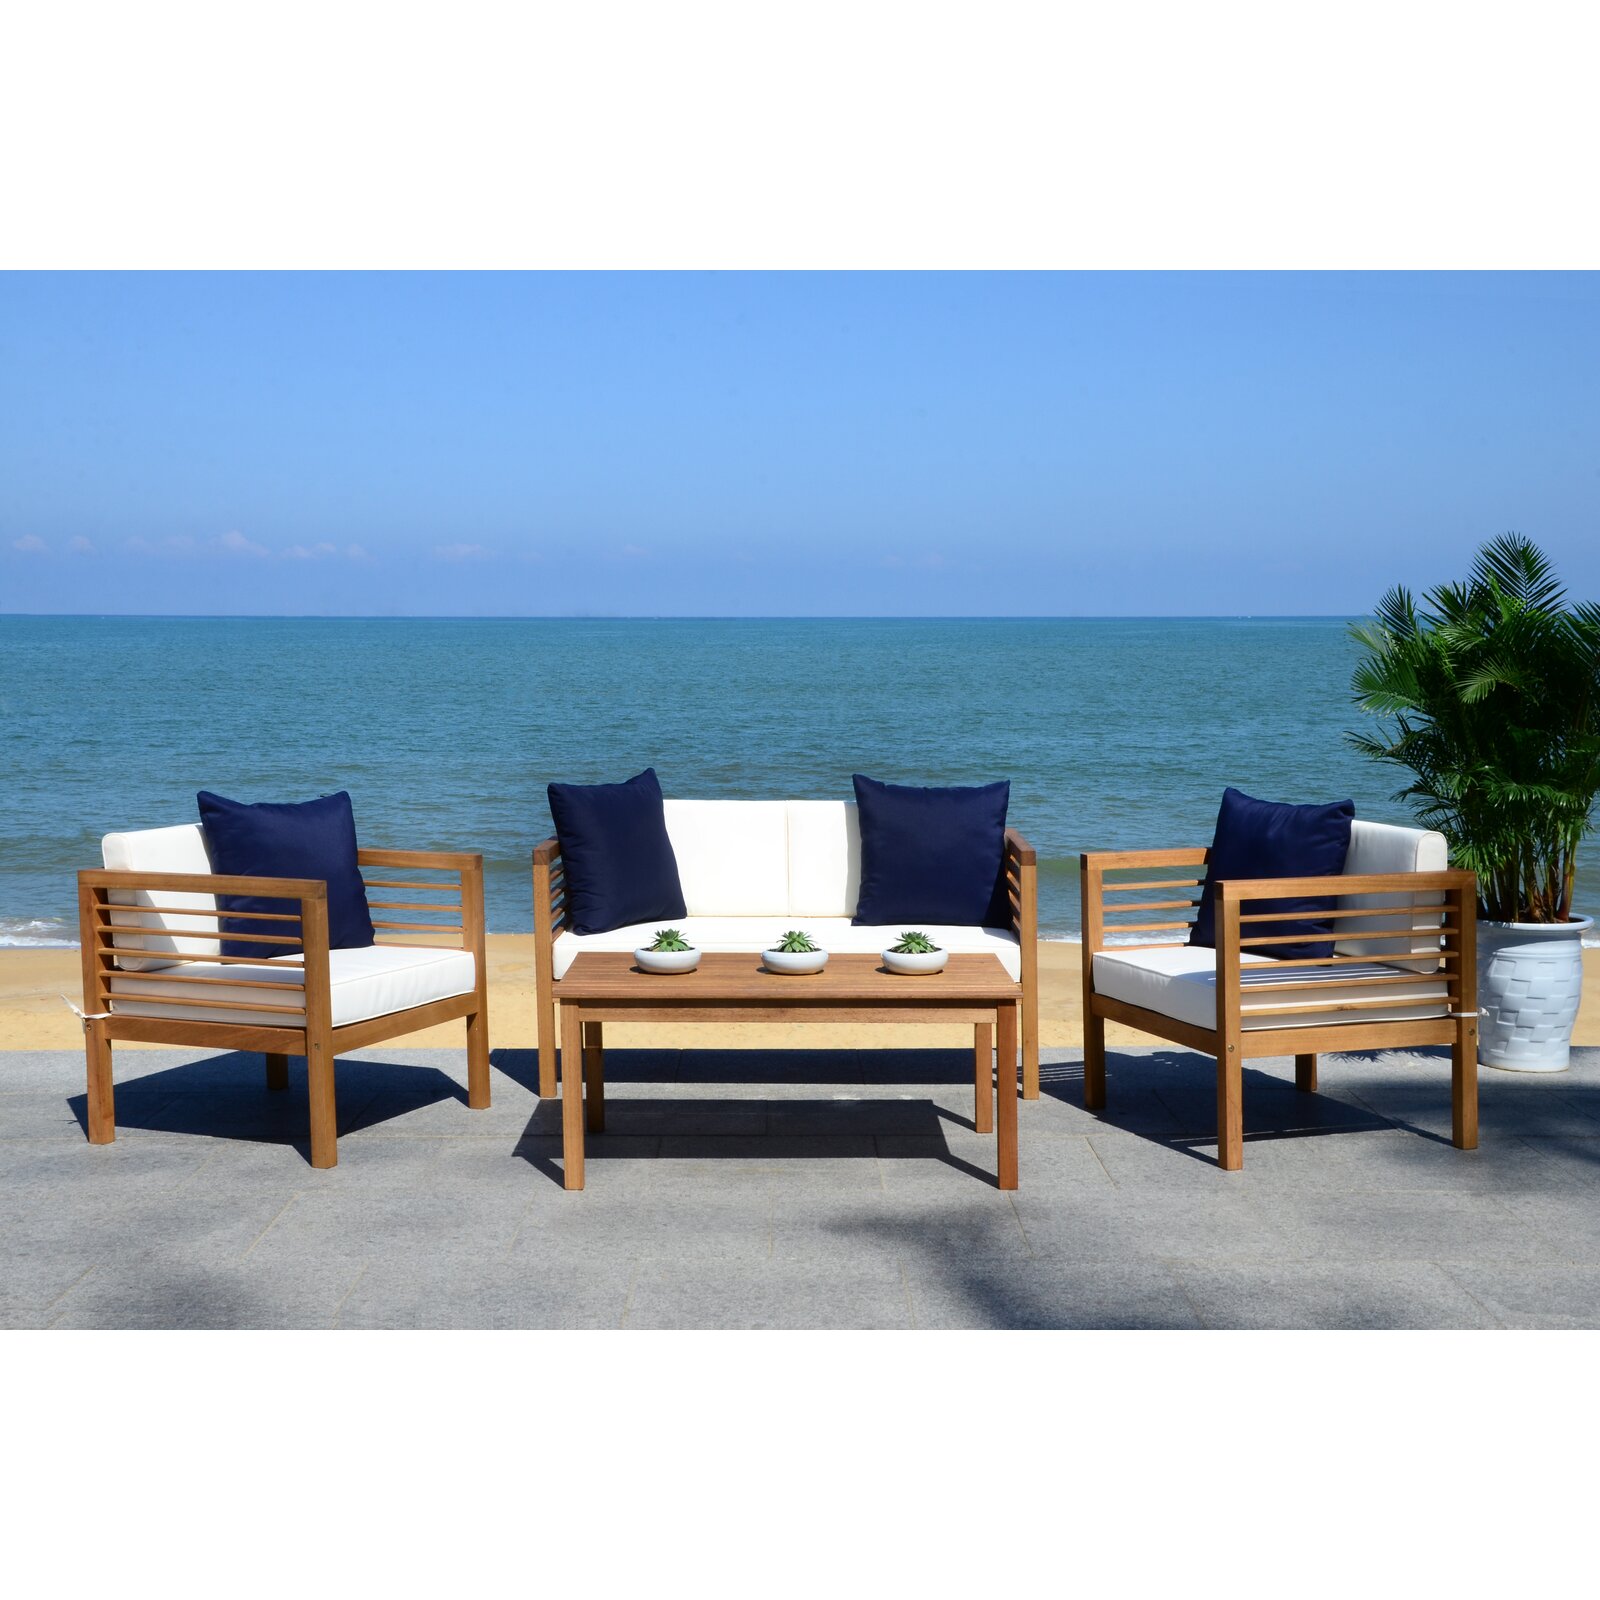 Dovecove Lovettsville Solid Wood 4 - Person Seating Group with Cushions & Reviews